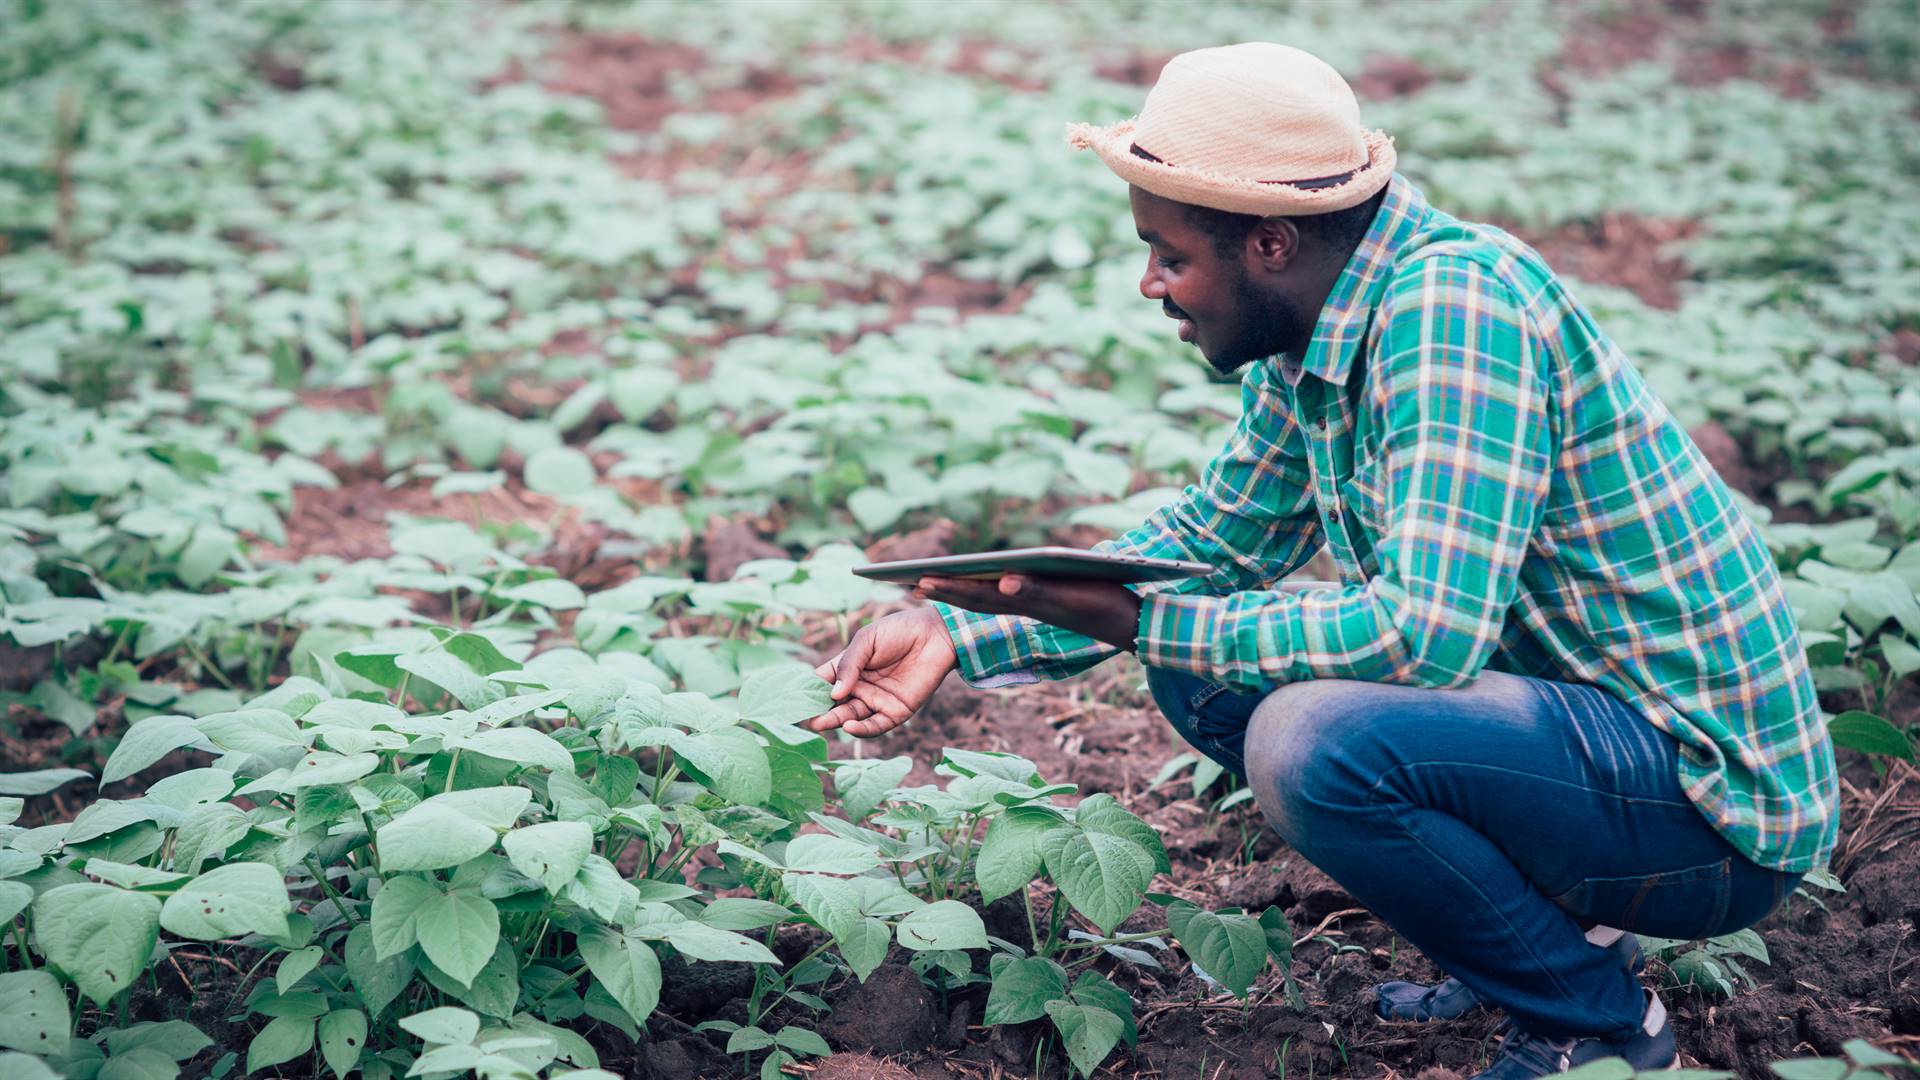 Black farmers in the US are unhappy that the targeted farm relief offered by the government doesn’t specifically mention minority communities. Photo: istock